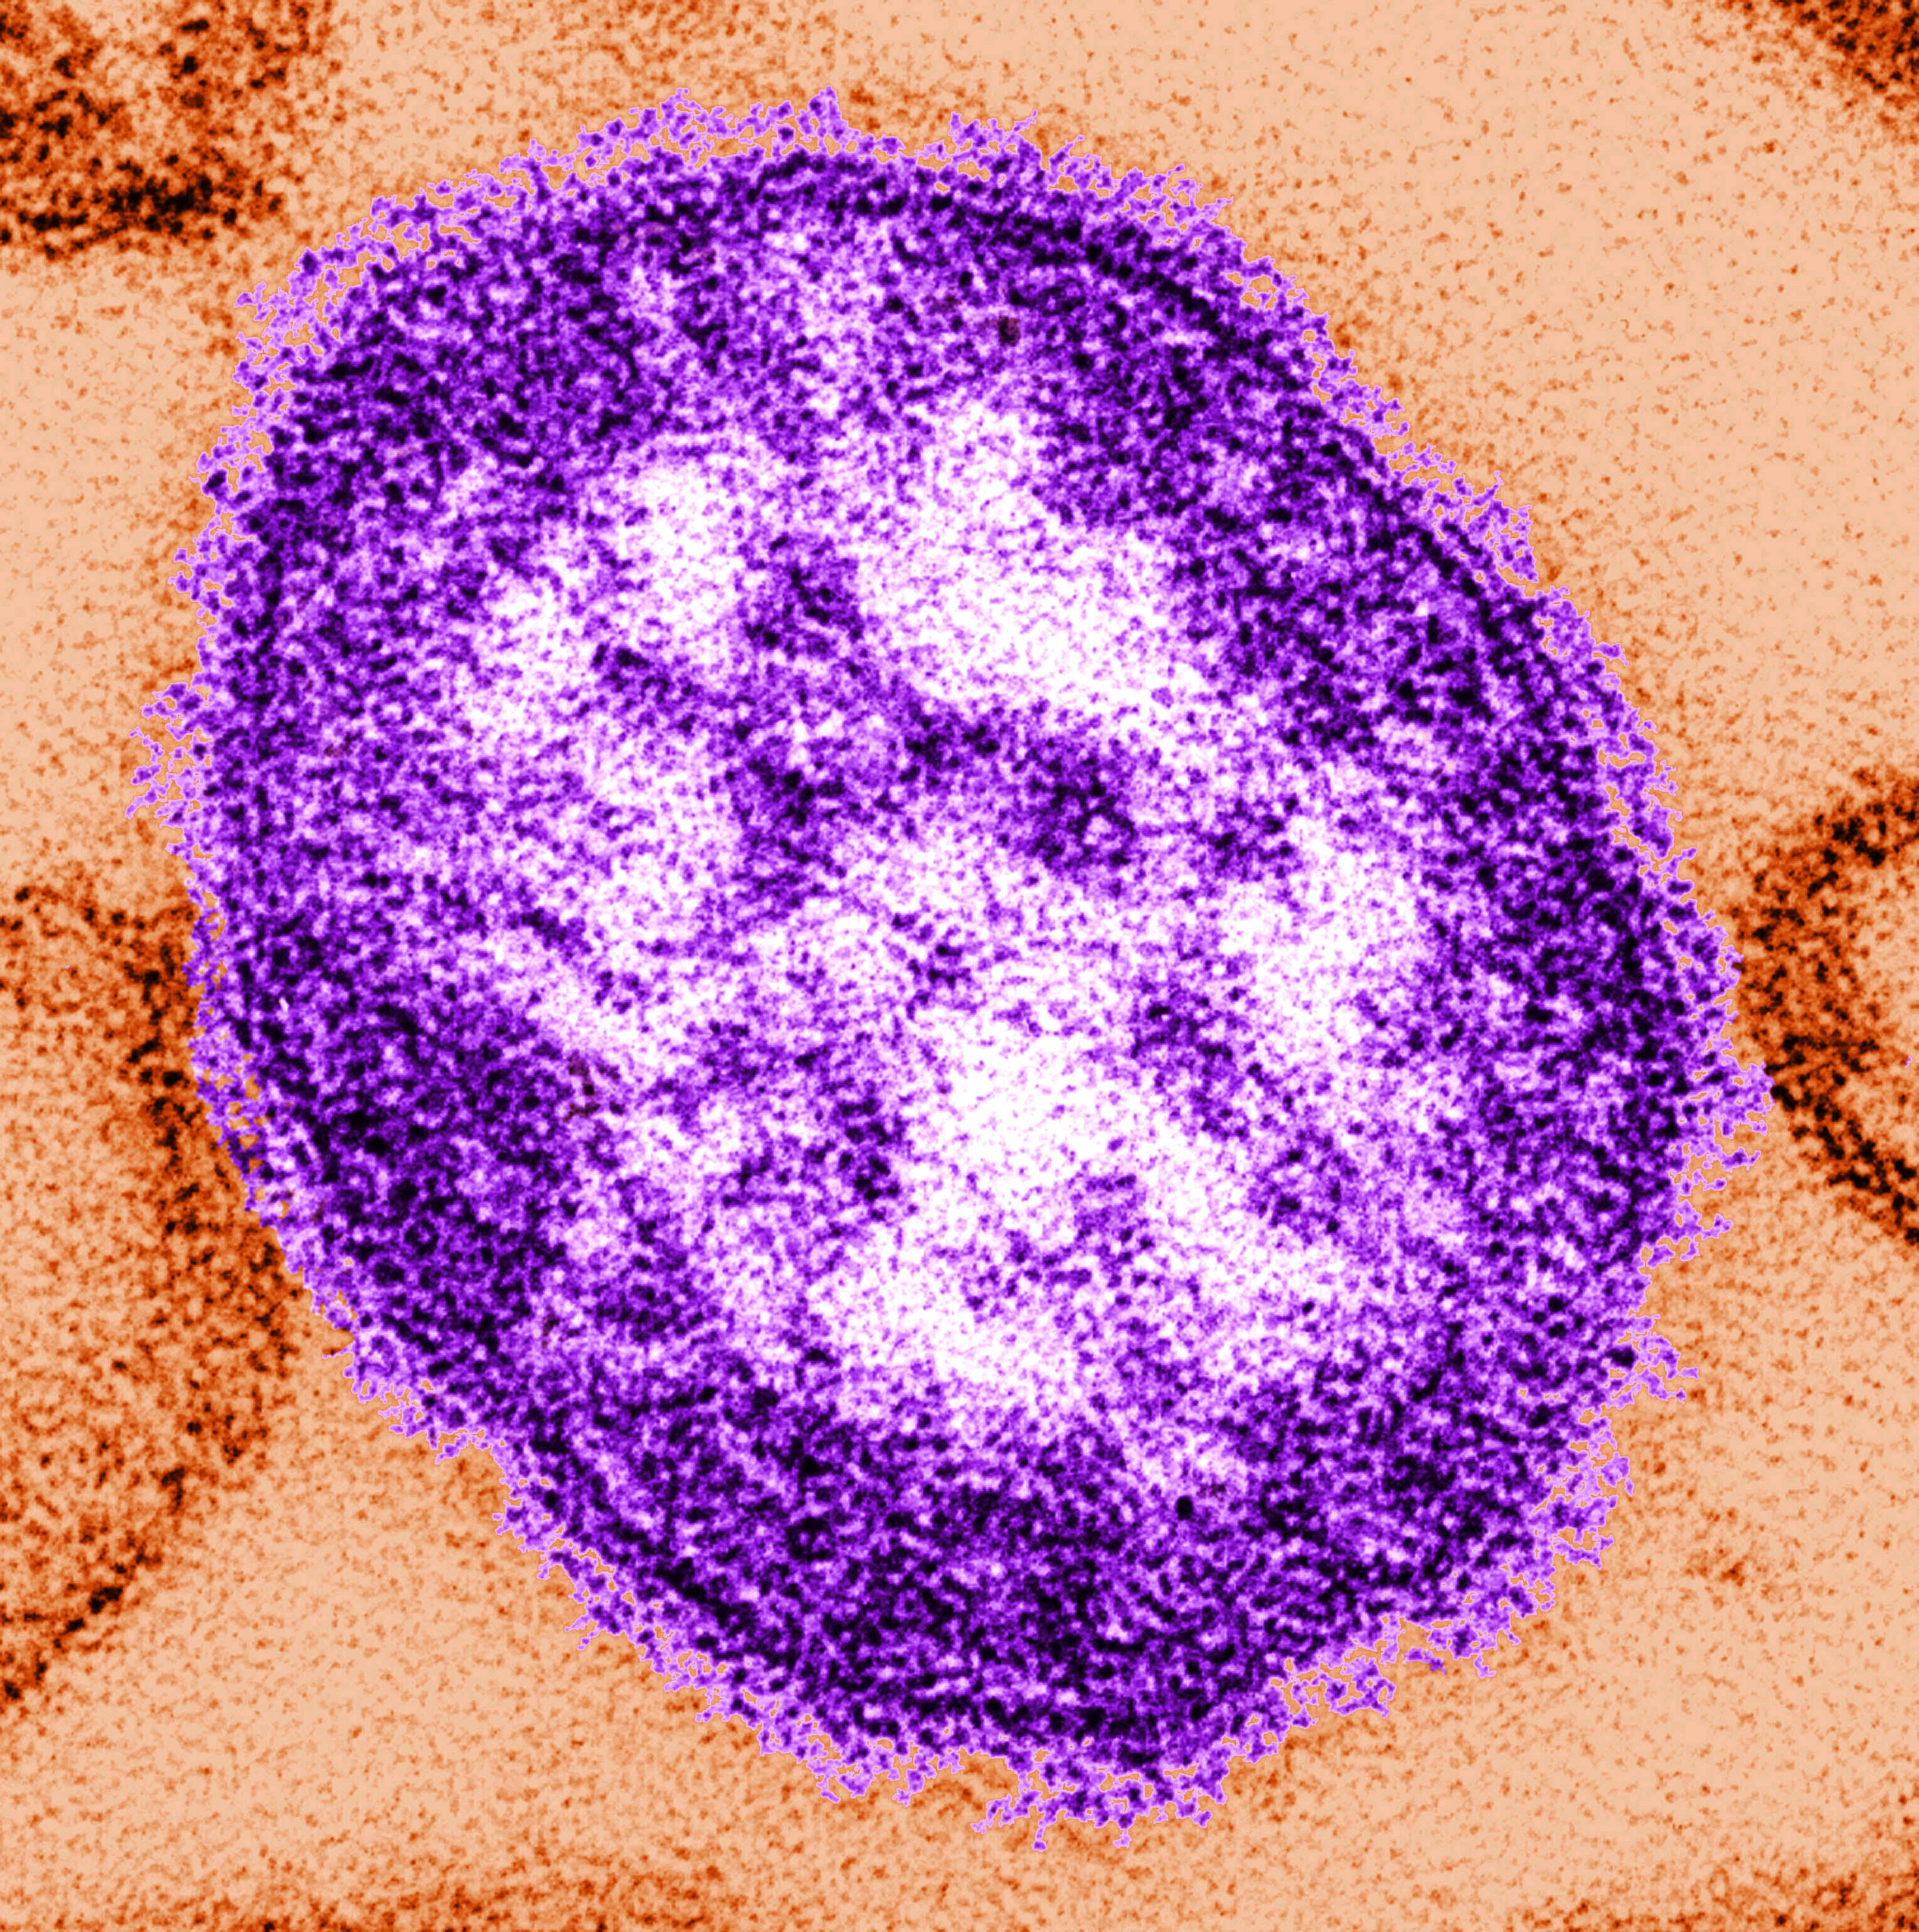 An electron microscope image of a measles virus particle